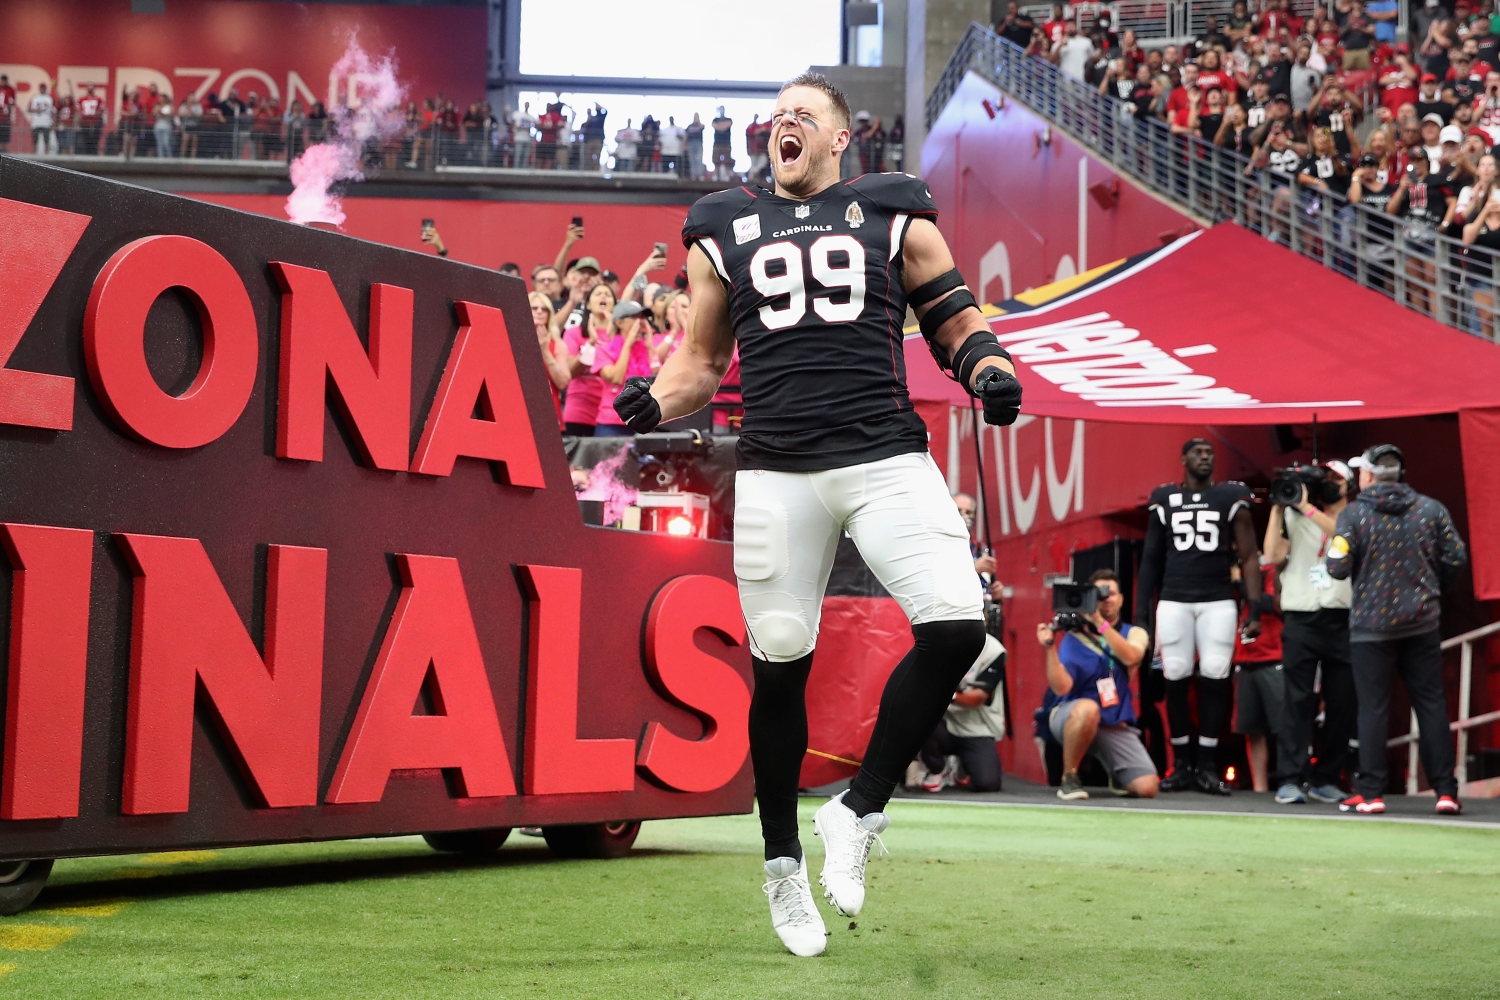 J.J. Watt Smartly Saved Himself From Suffering Inevitable Pain by Successfully Pulling Off a Plan That’s Finally Given Him a Legitimate Chance to Cross the Last Item Off His NFL Bucket List